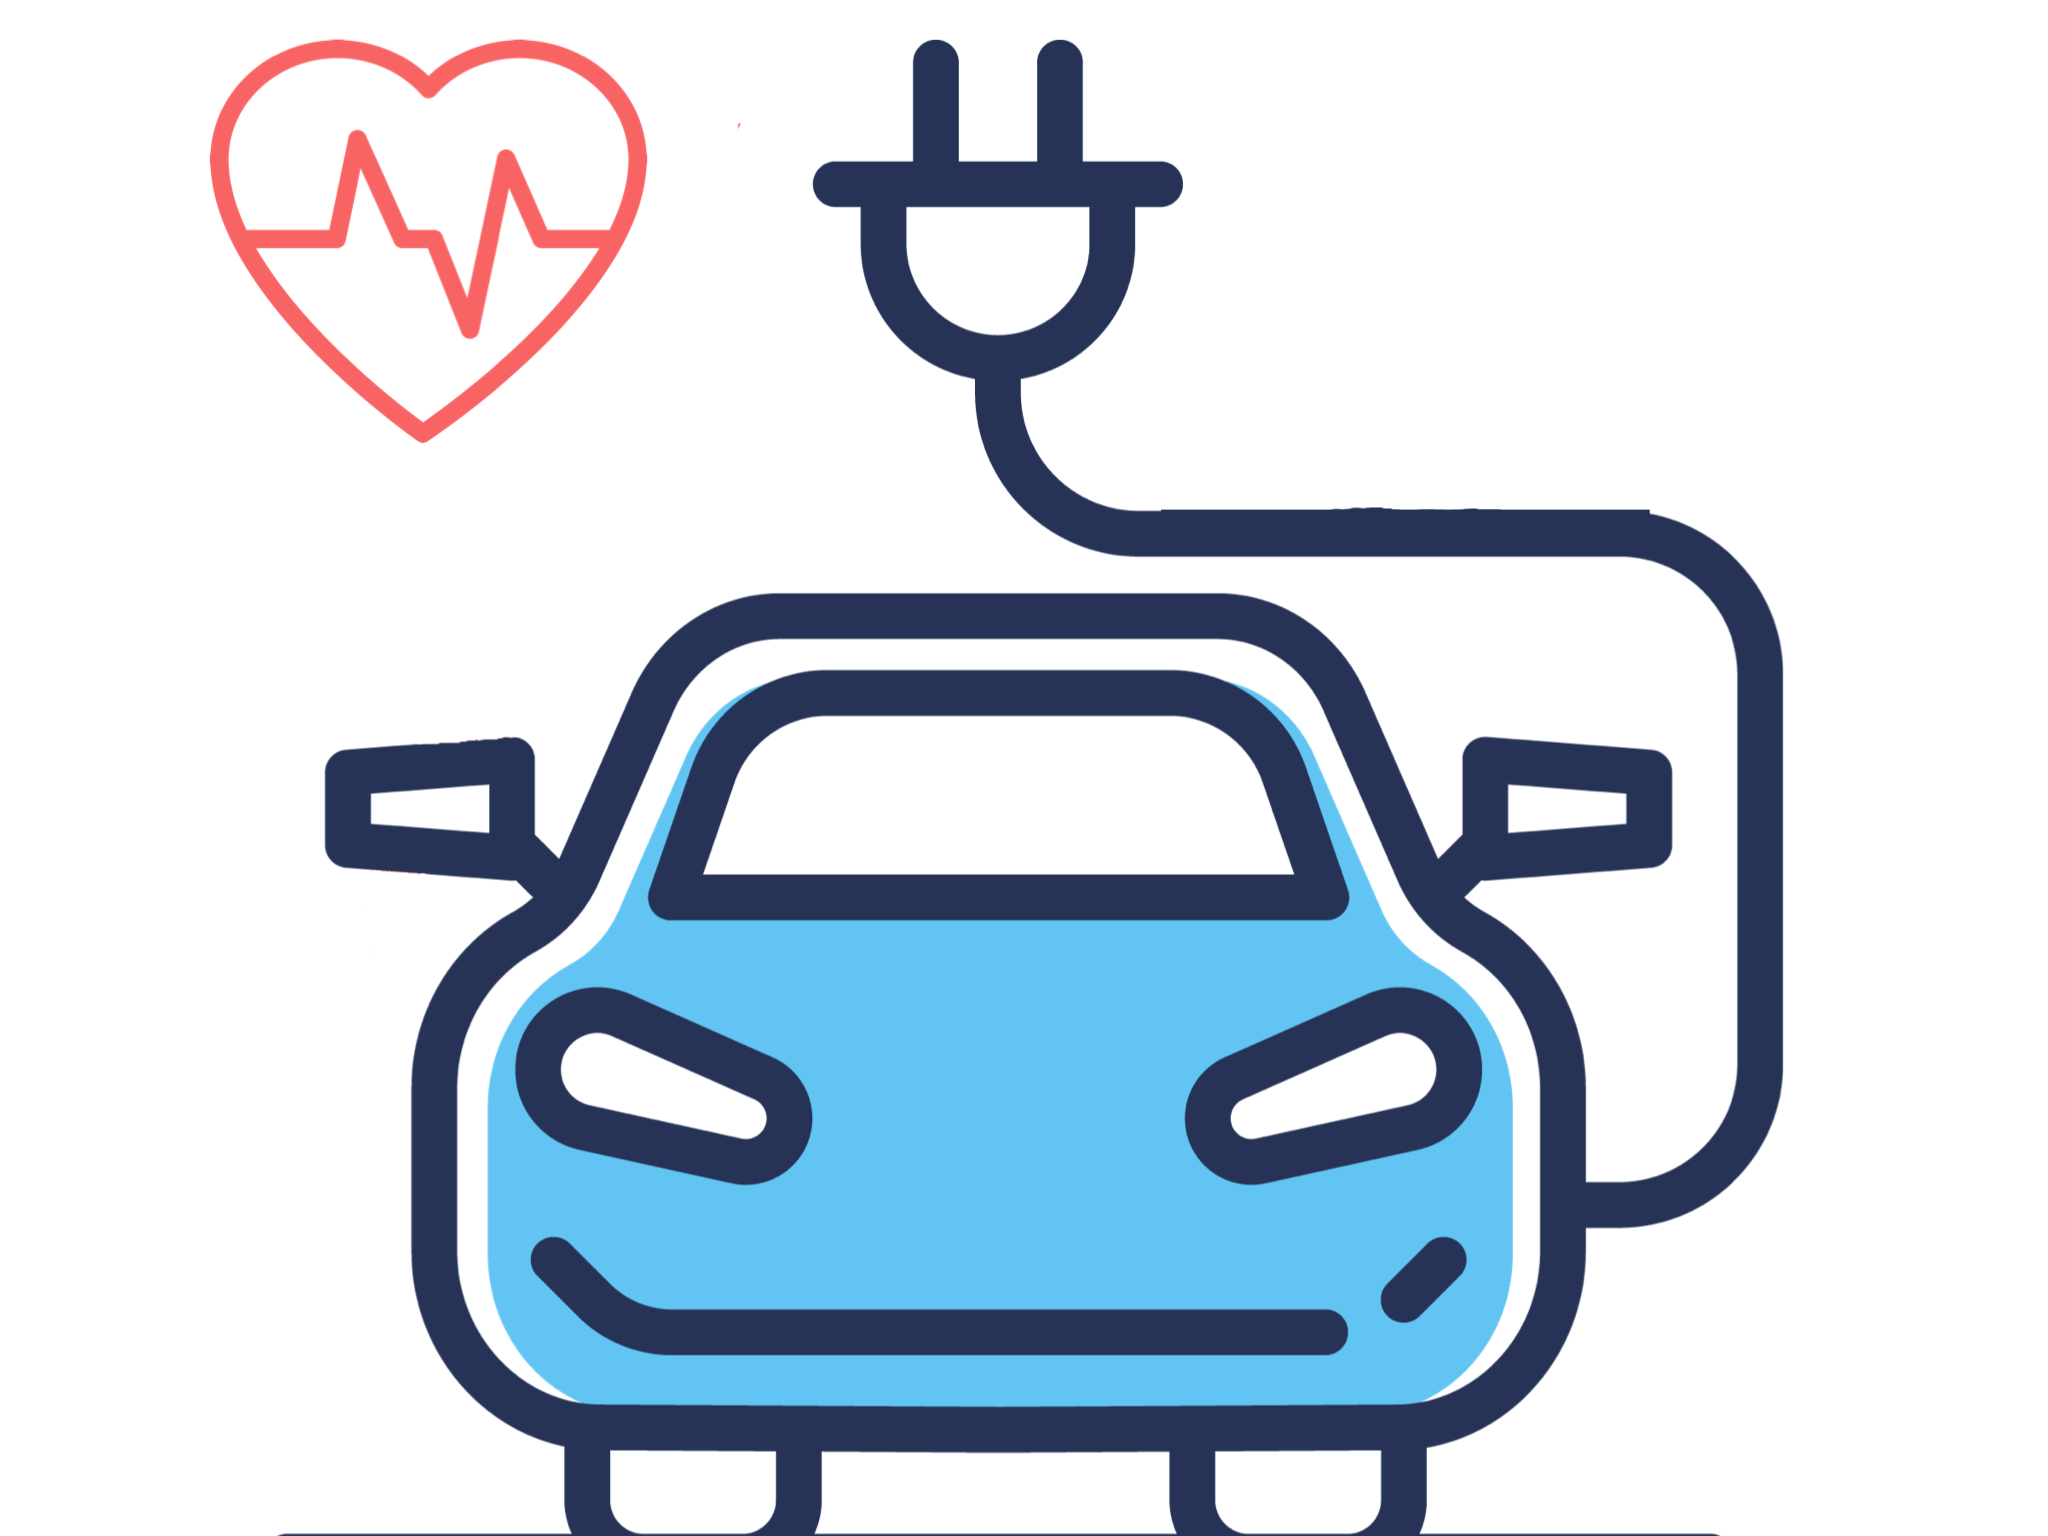 Clean cars support our health. Read more on clean cars through our policy papers and blog posts.